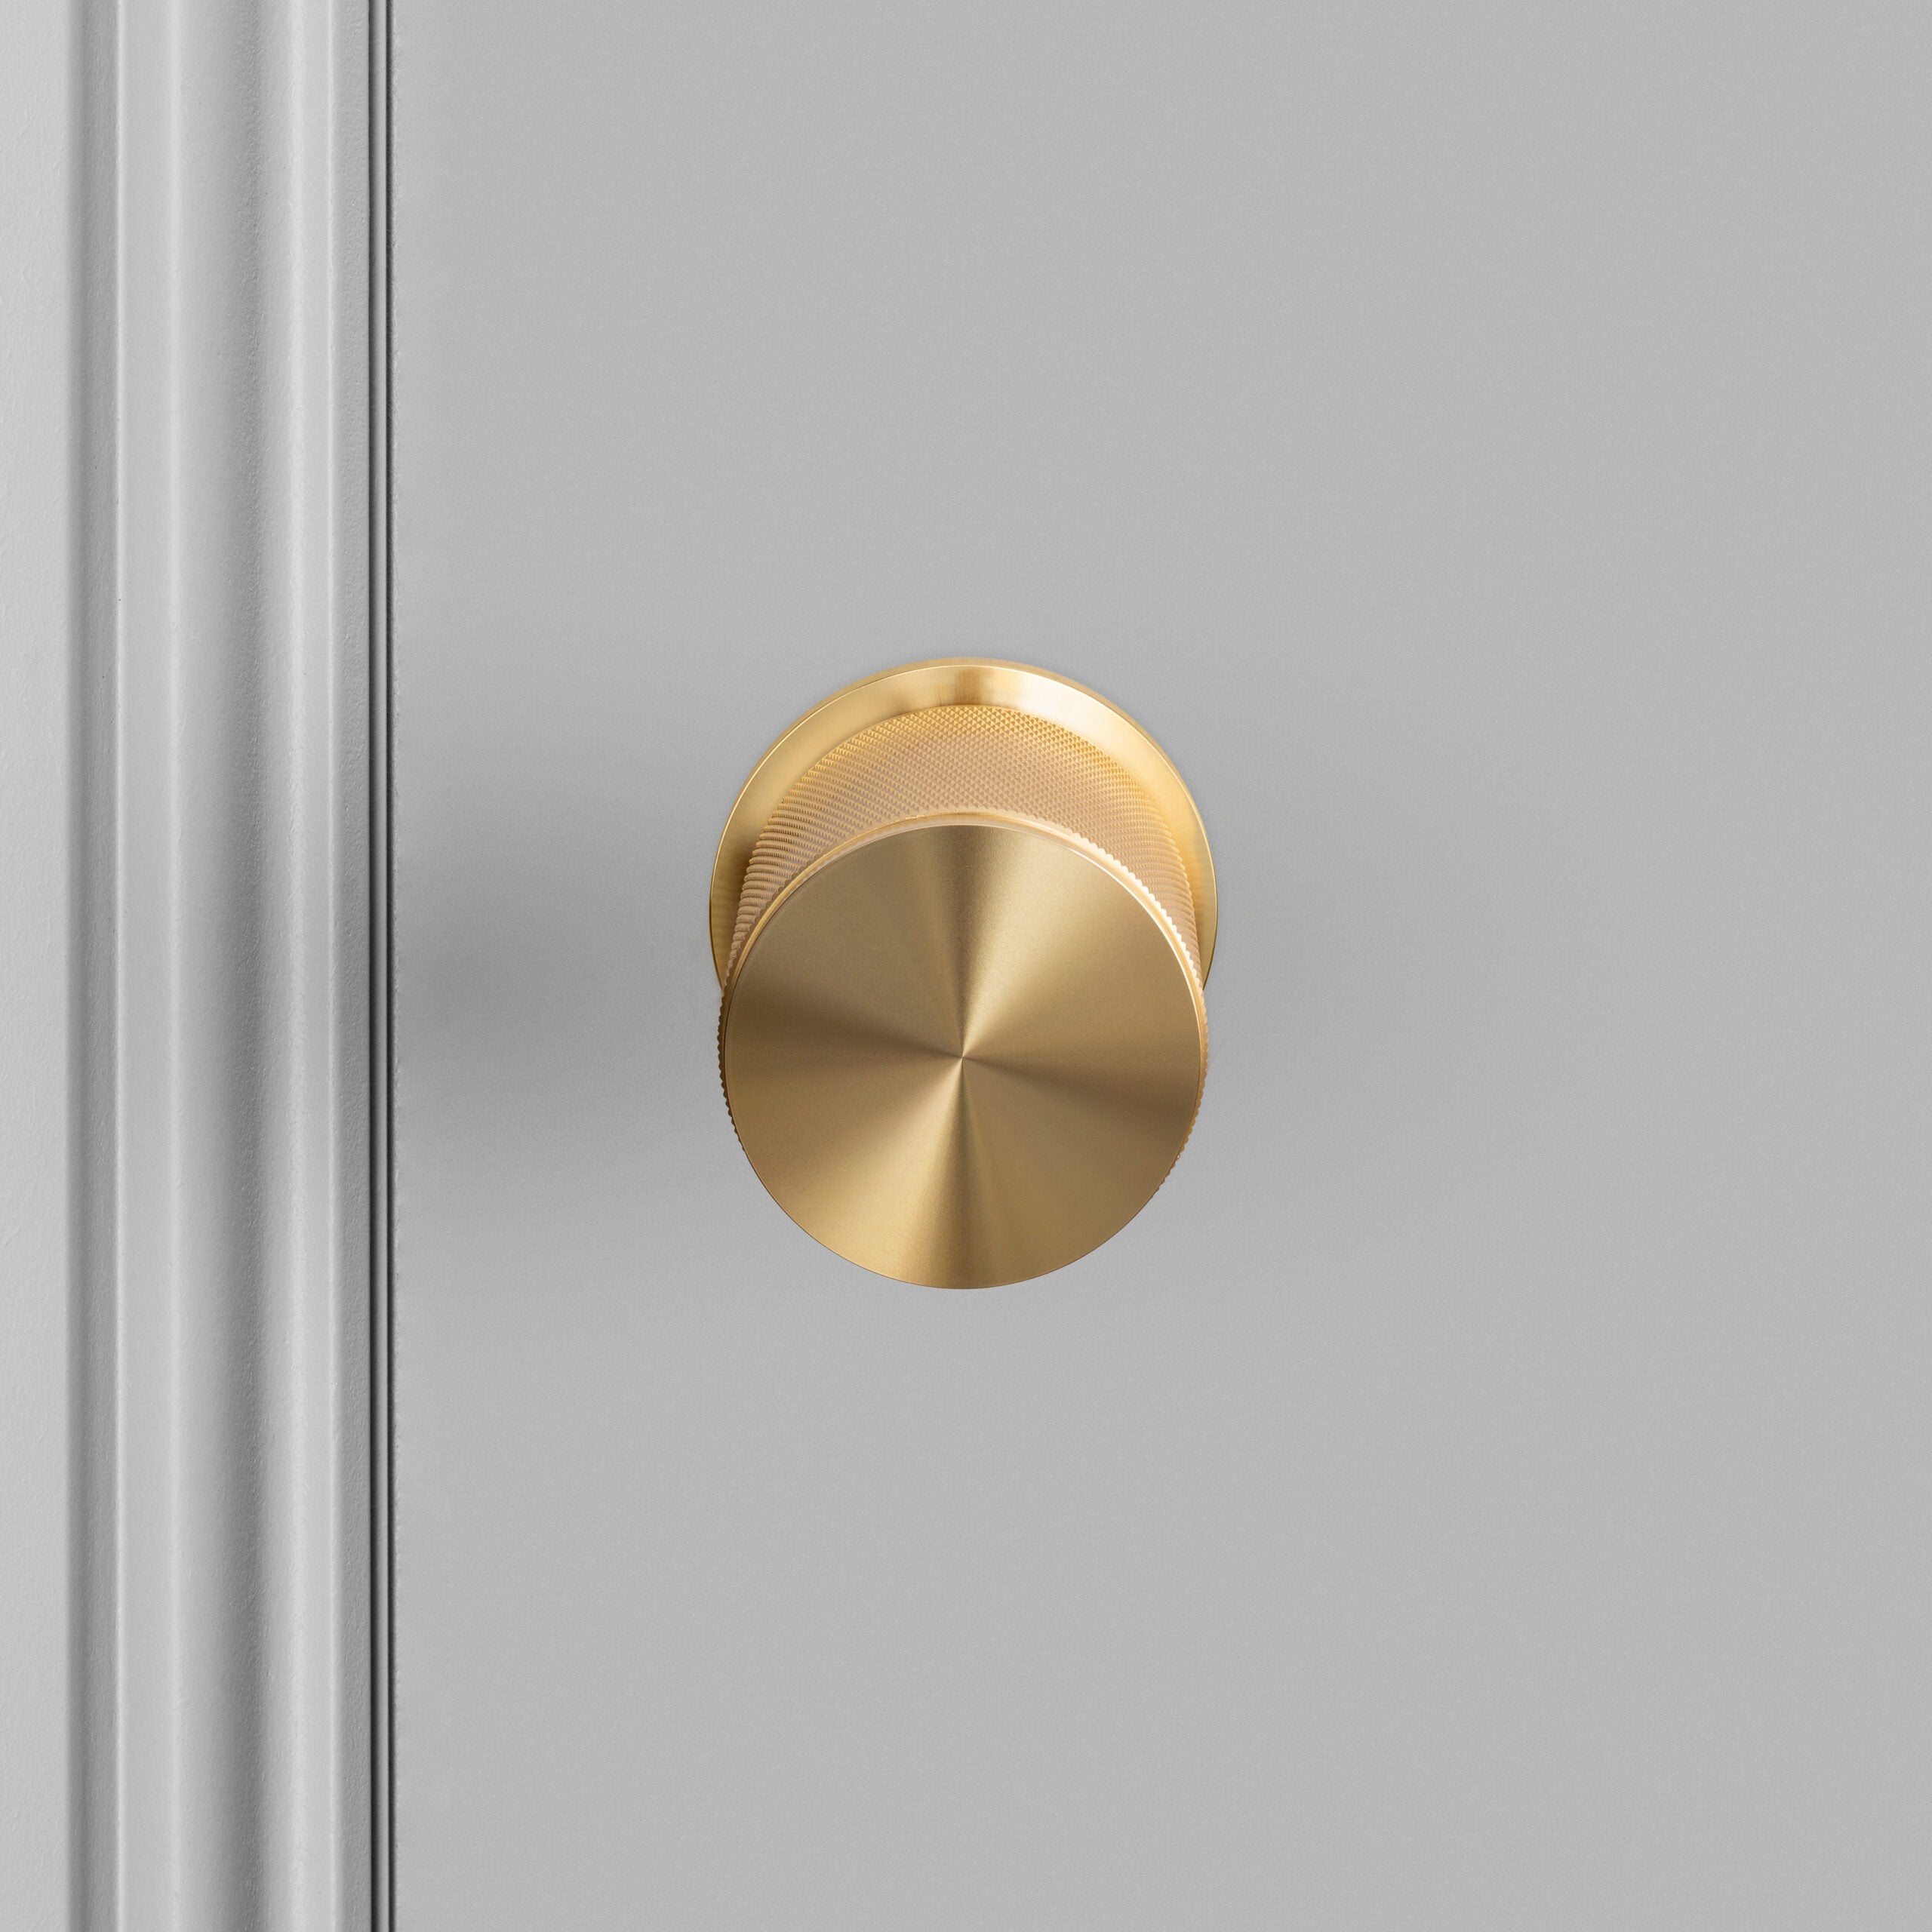 Buster + Punch Door Knob Single Sided, Cross Design, FIXED TYPE